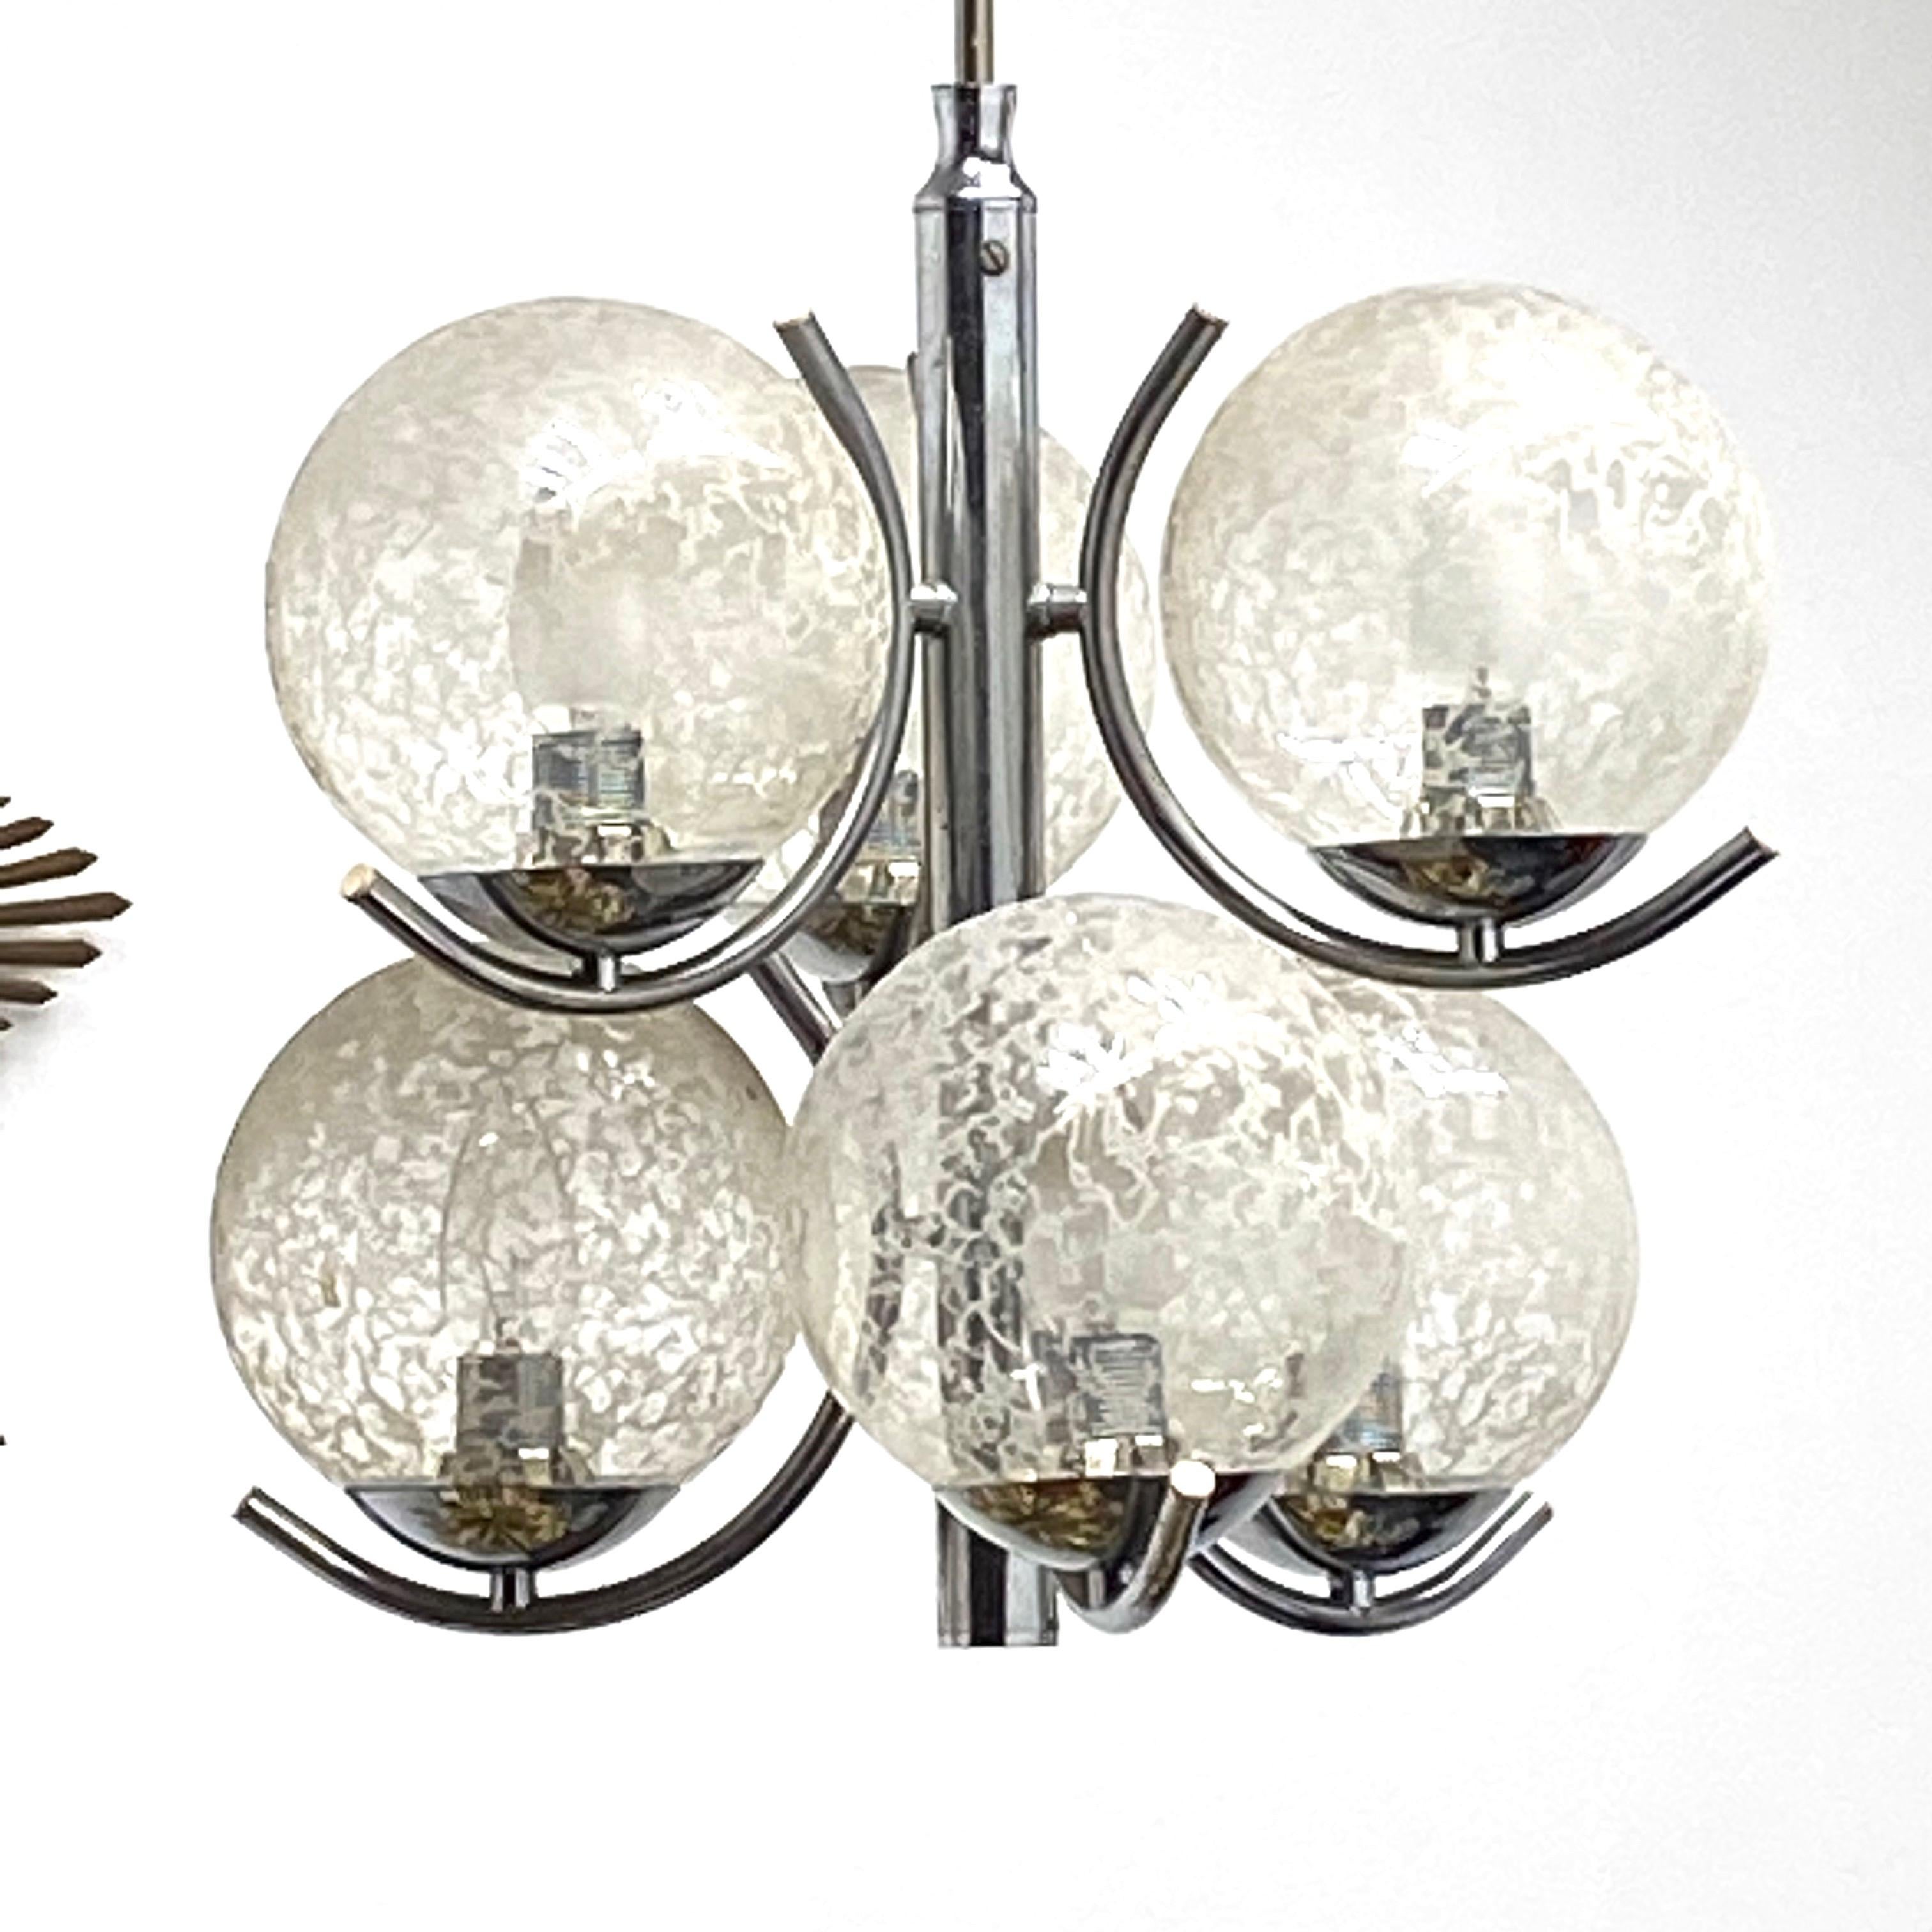 Metal 2 Tiered Richard Essig 6-Arm Space Age Chandelier, 1970s, Germany For Sale